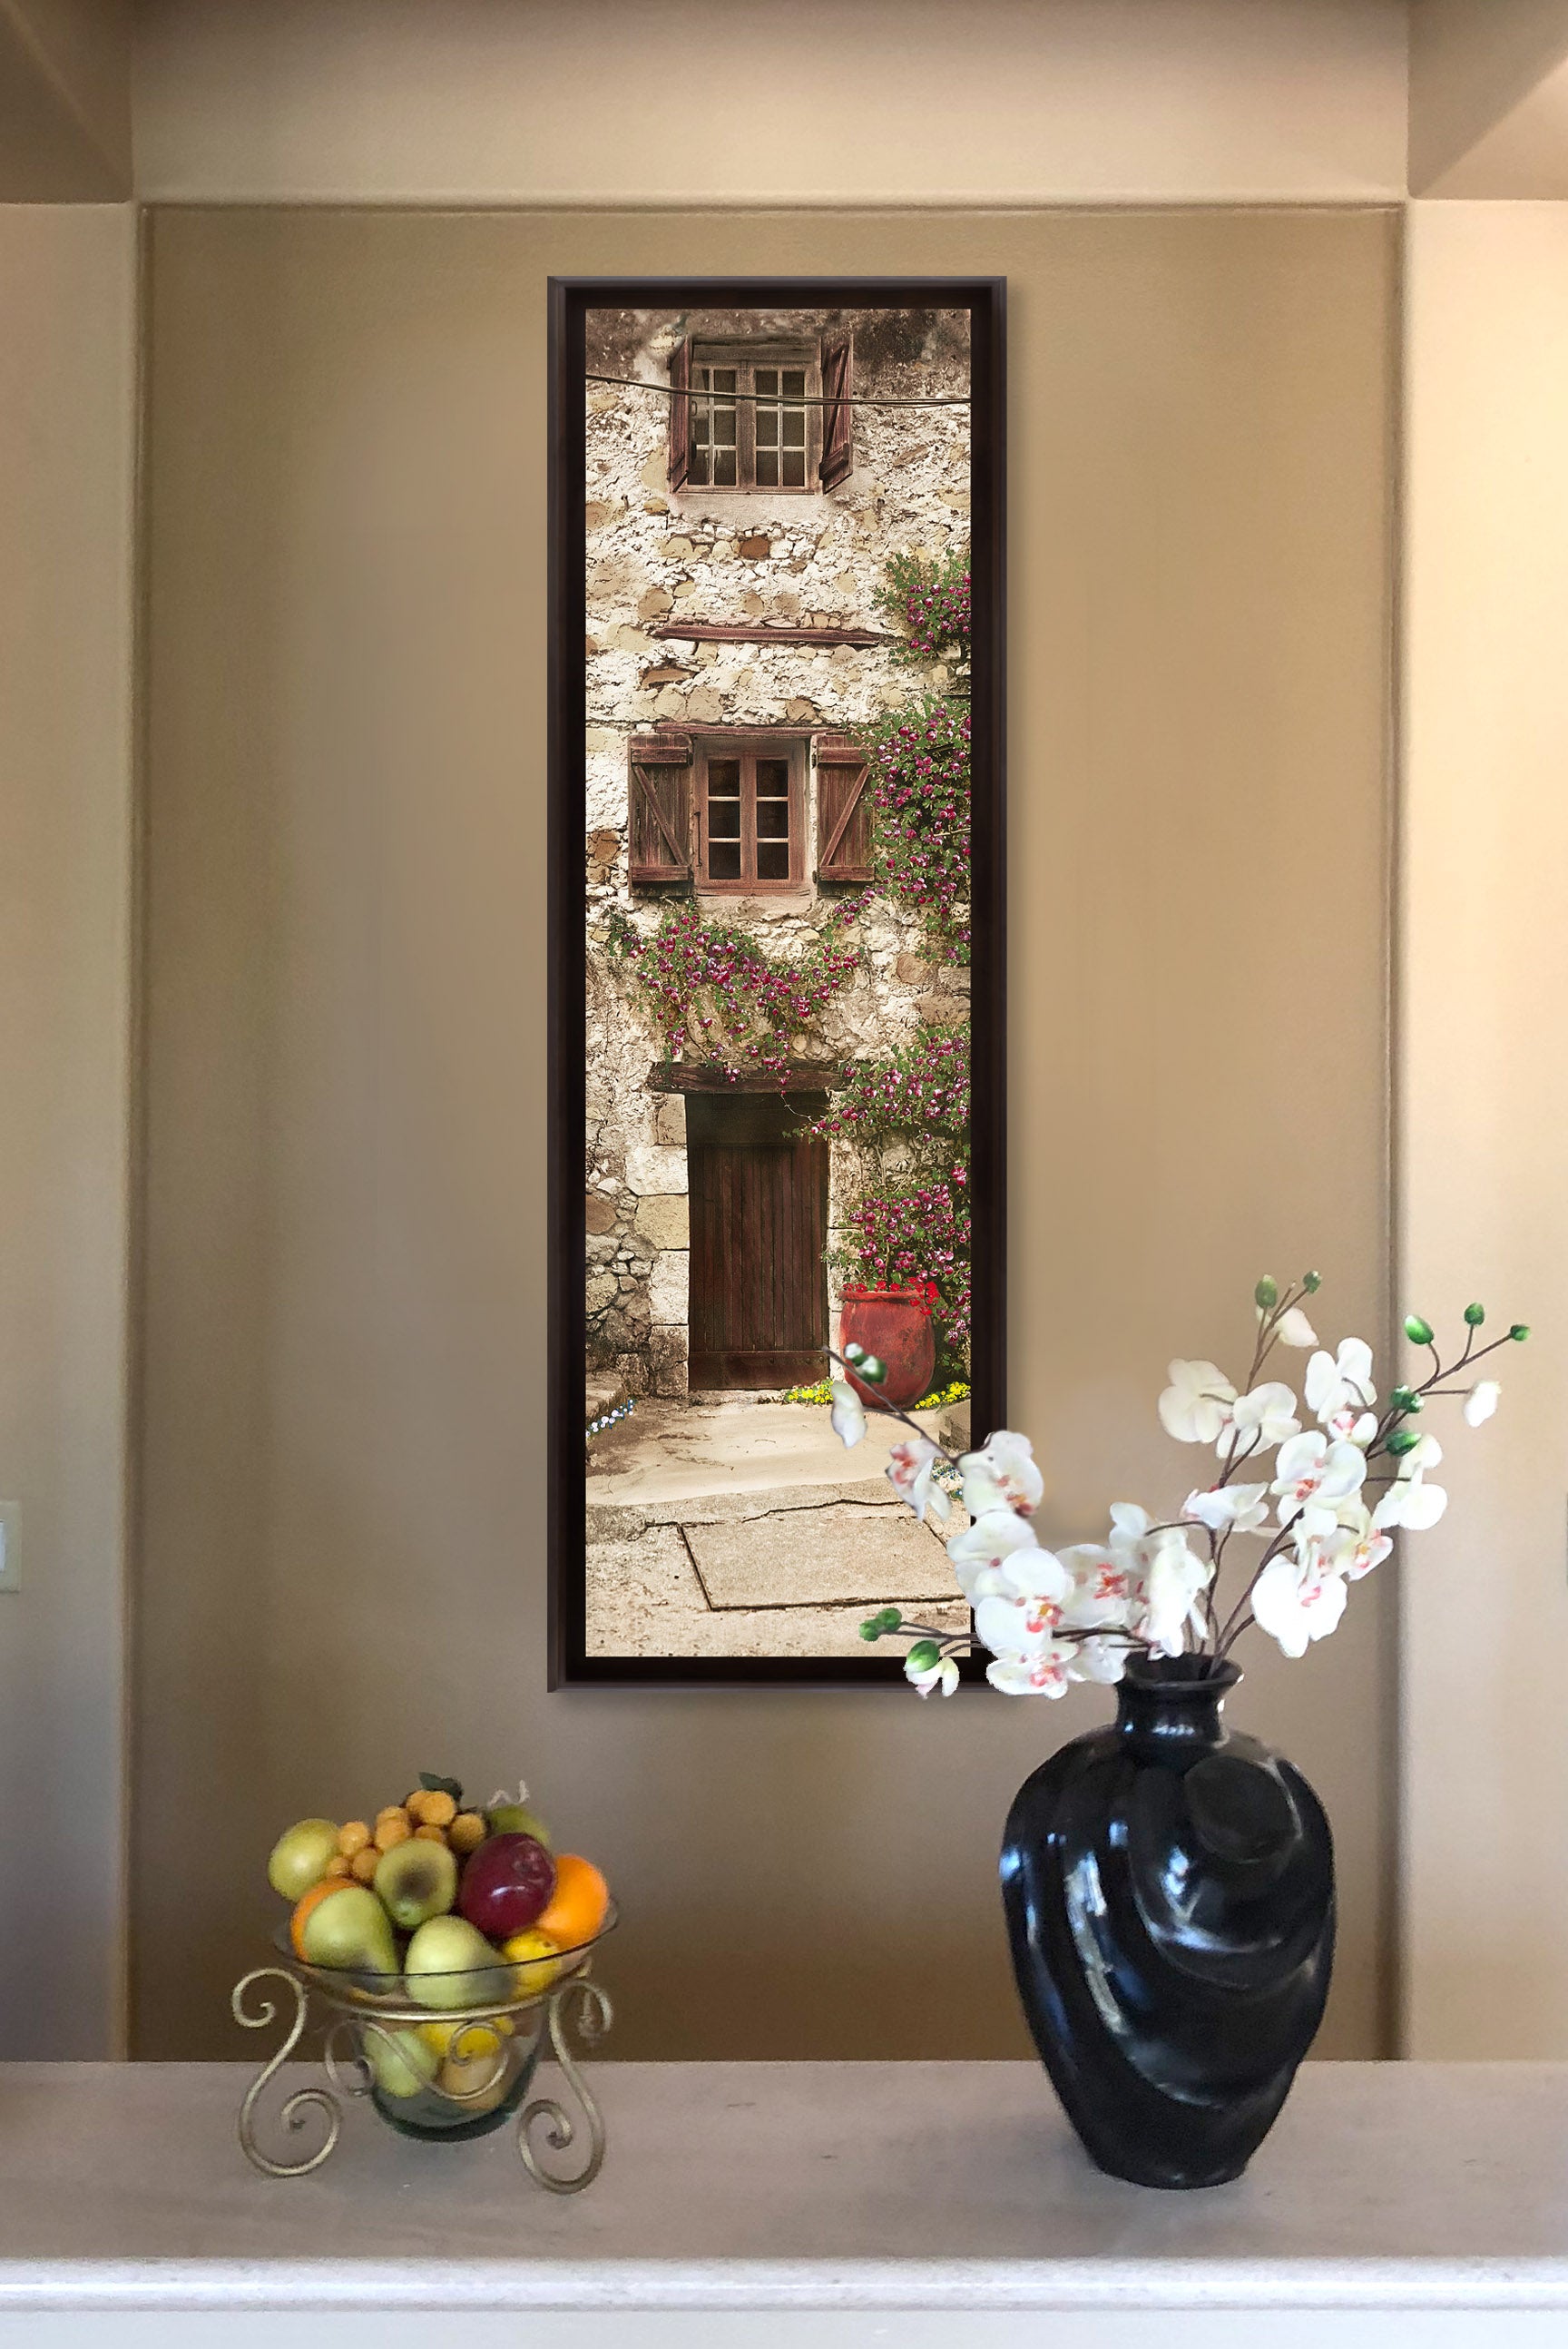 "End of the Alley" TALL SKINNY CANVAS FRAMED PRINT "15 X 45"